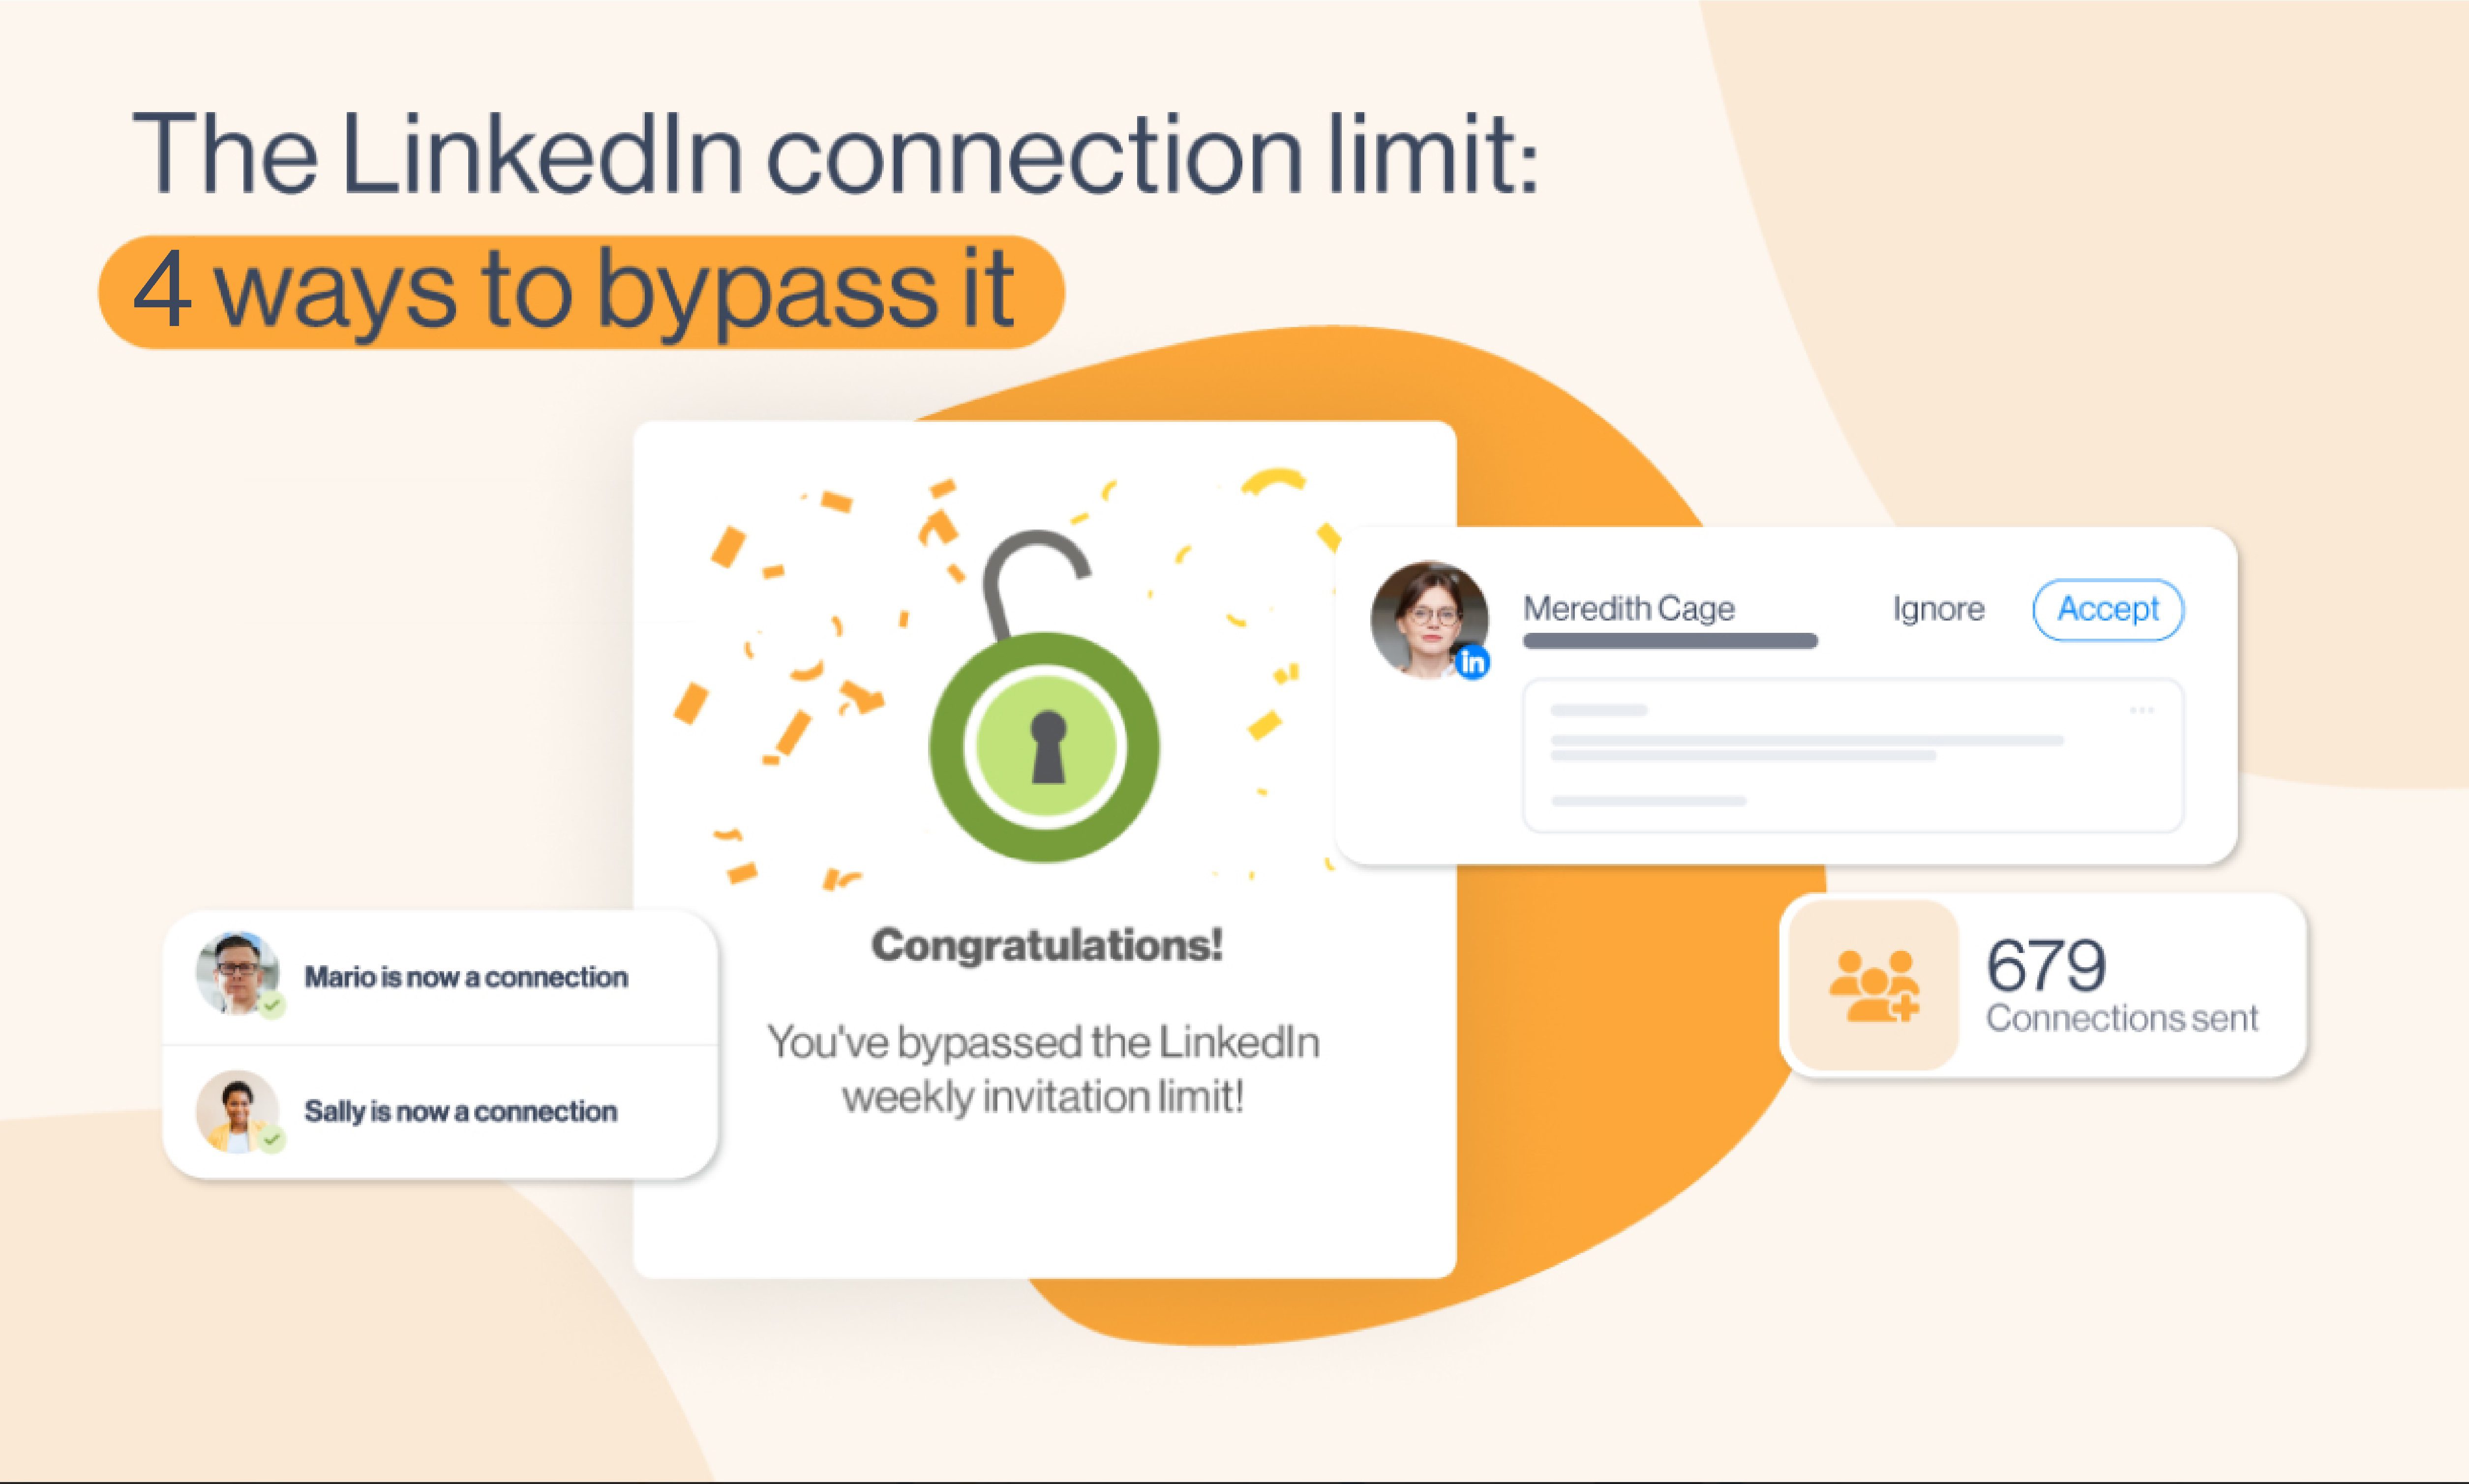 Cover image of 4 ways to buypass LinkedIn connection limit